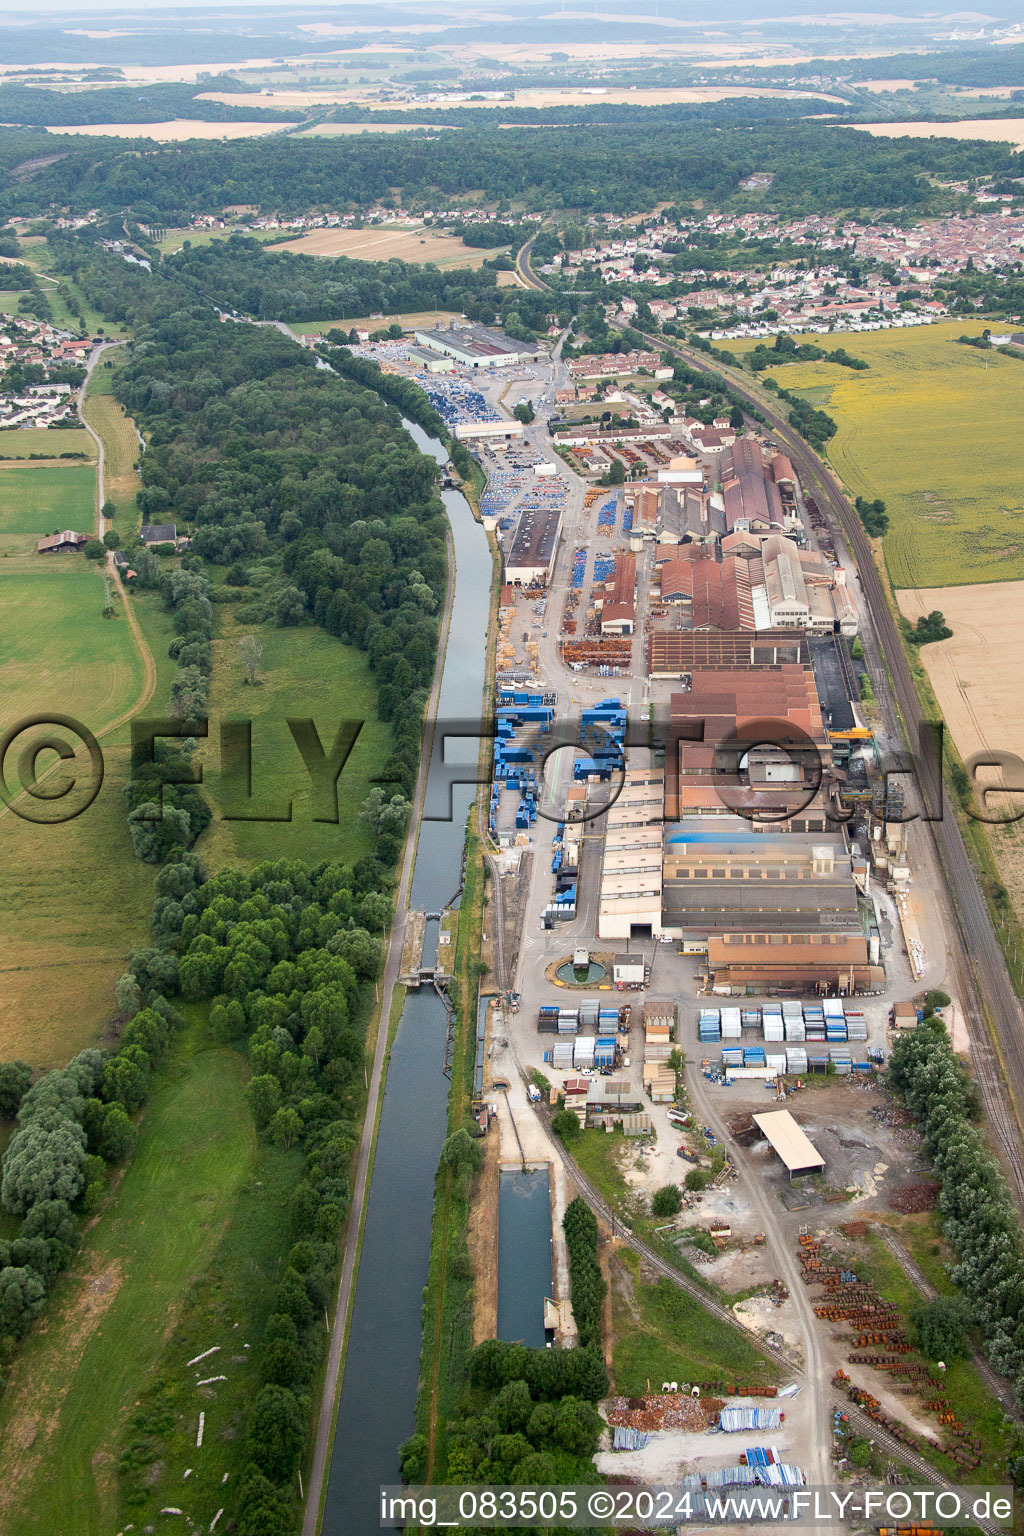 Aerial view of Building and production halls on the premises of Foundery Saint Gobain PAM on Canal de la Marne au Rhin in Foug in Grand Est, France